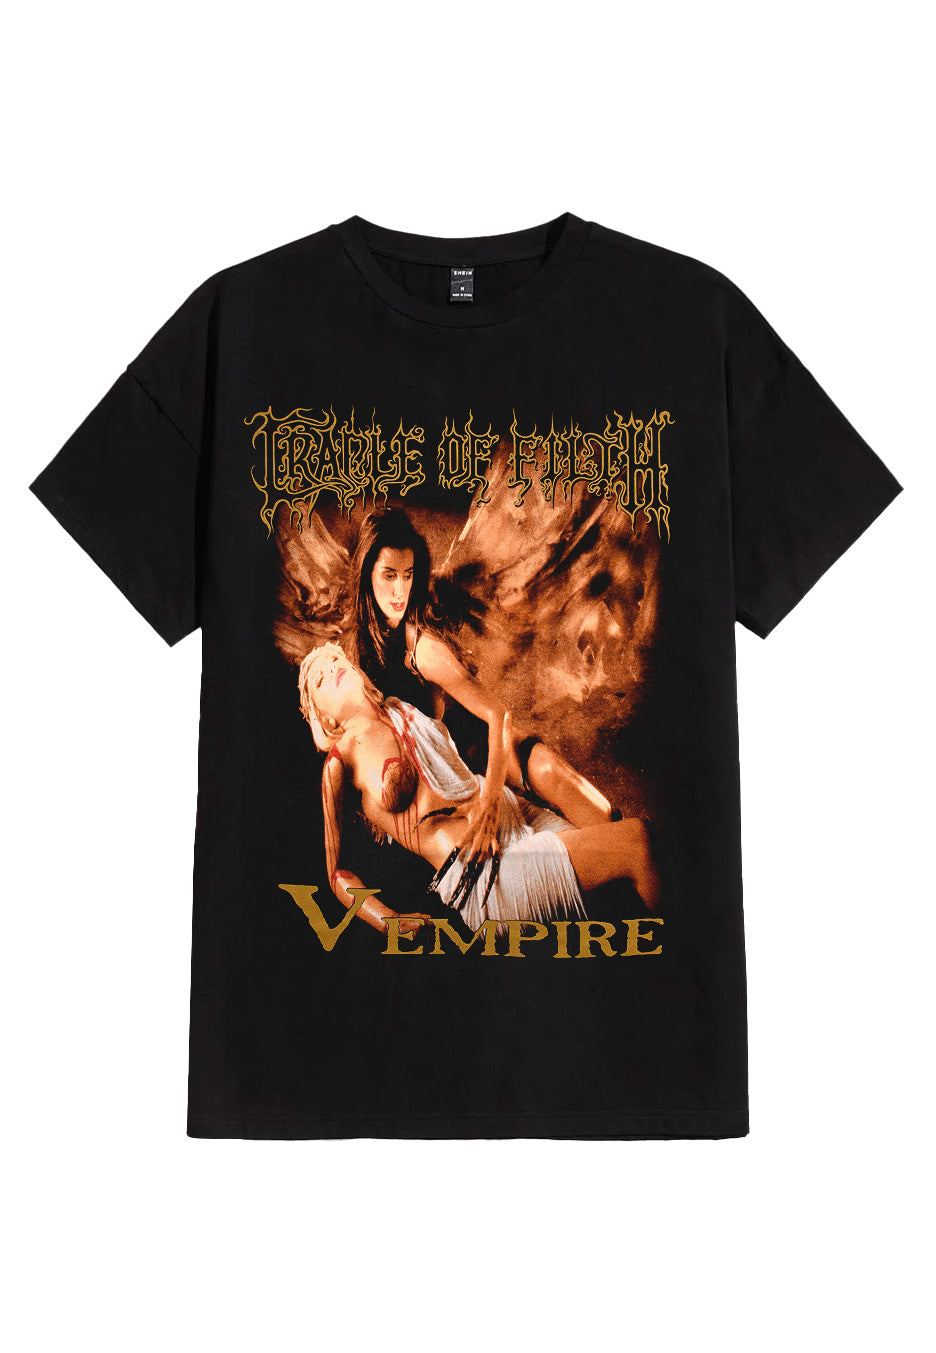 Cradle Of Filth - Vempire - T-Shirt